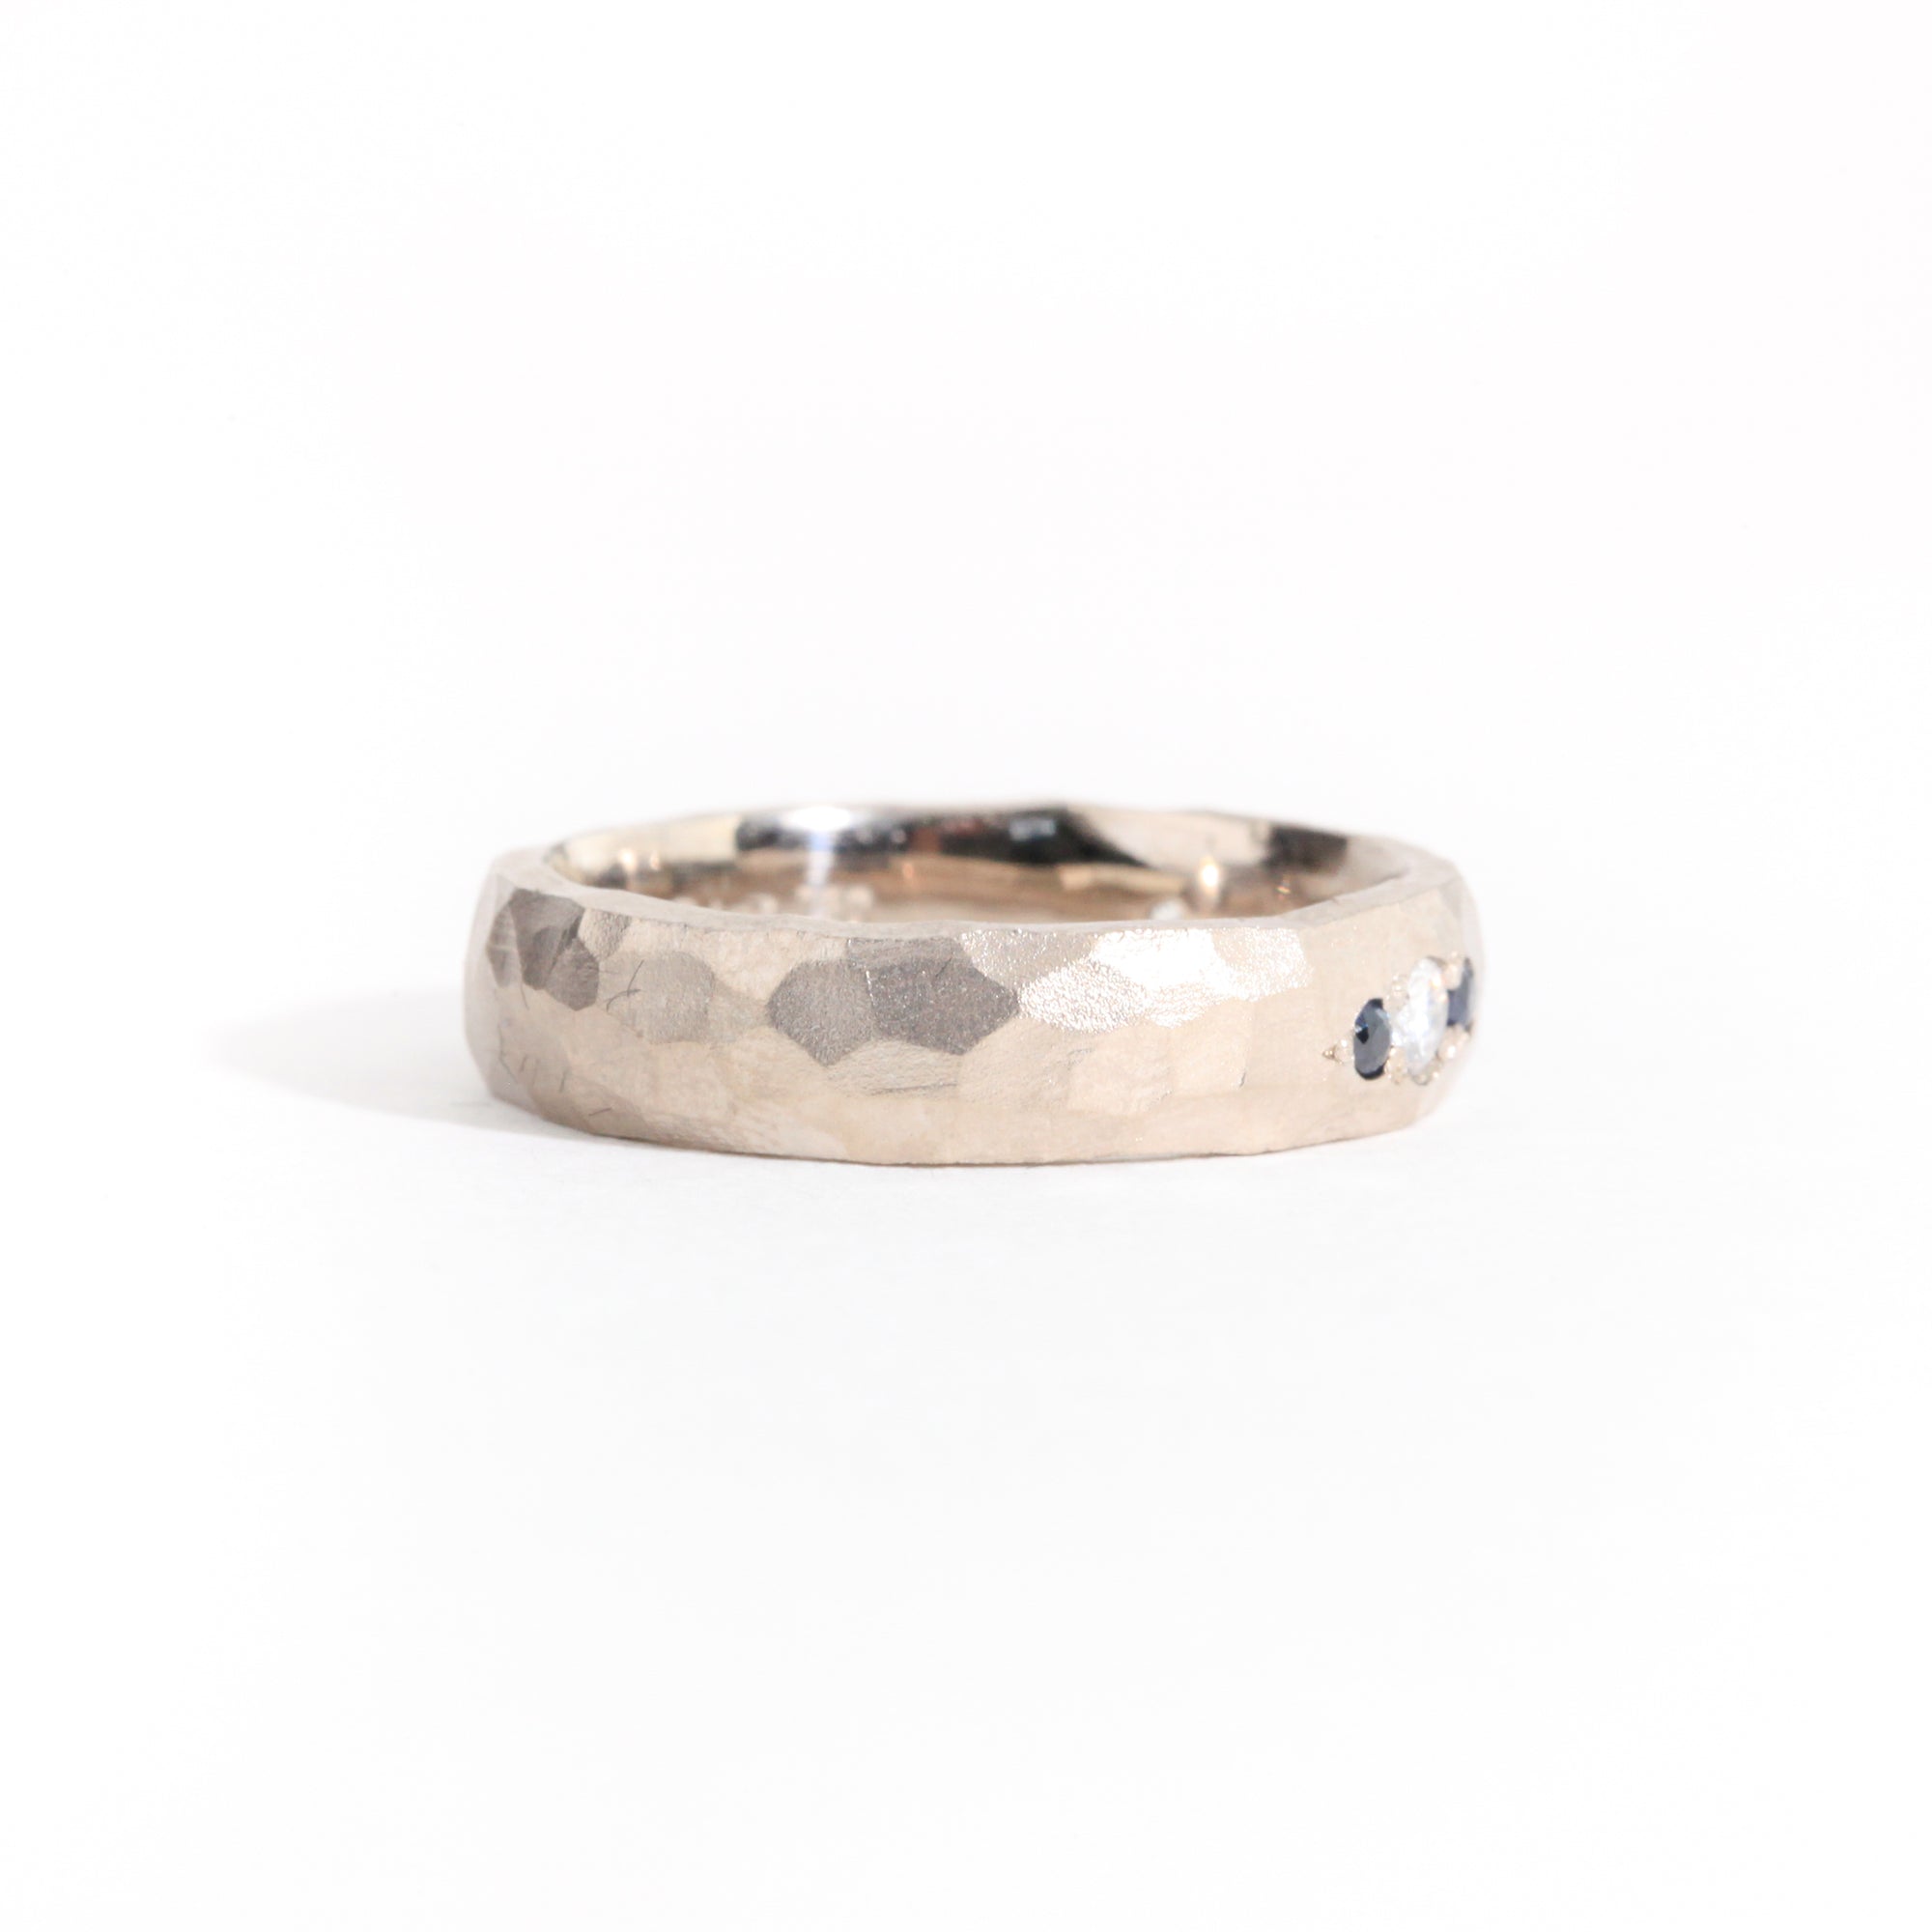 Hammered 18 carat white gold men's wedding band, set with ethically sourced Australian sapphires and conflict free diamonds.